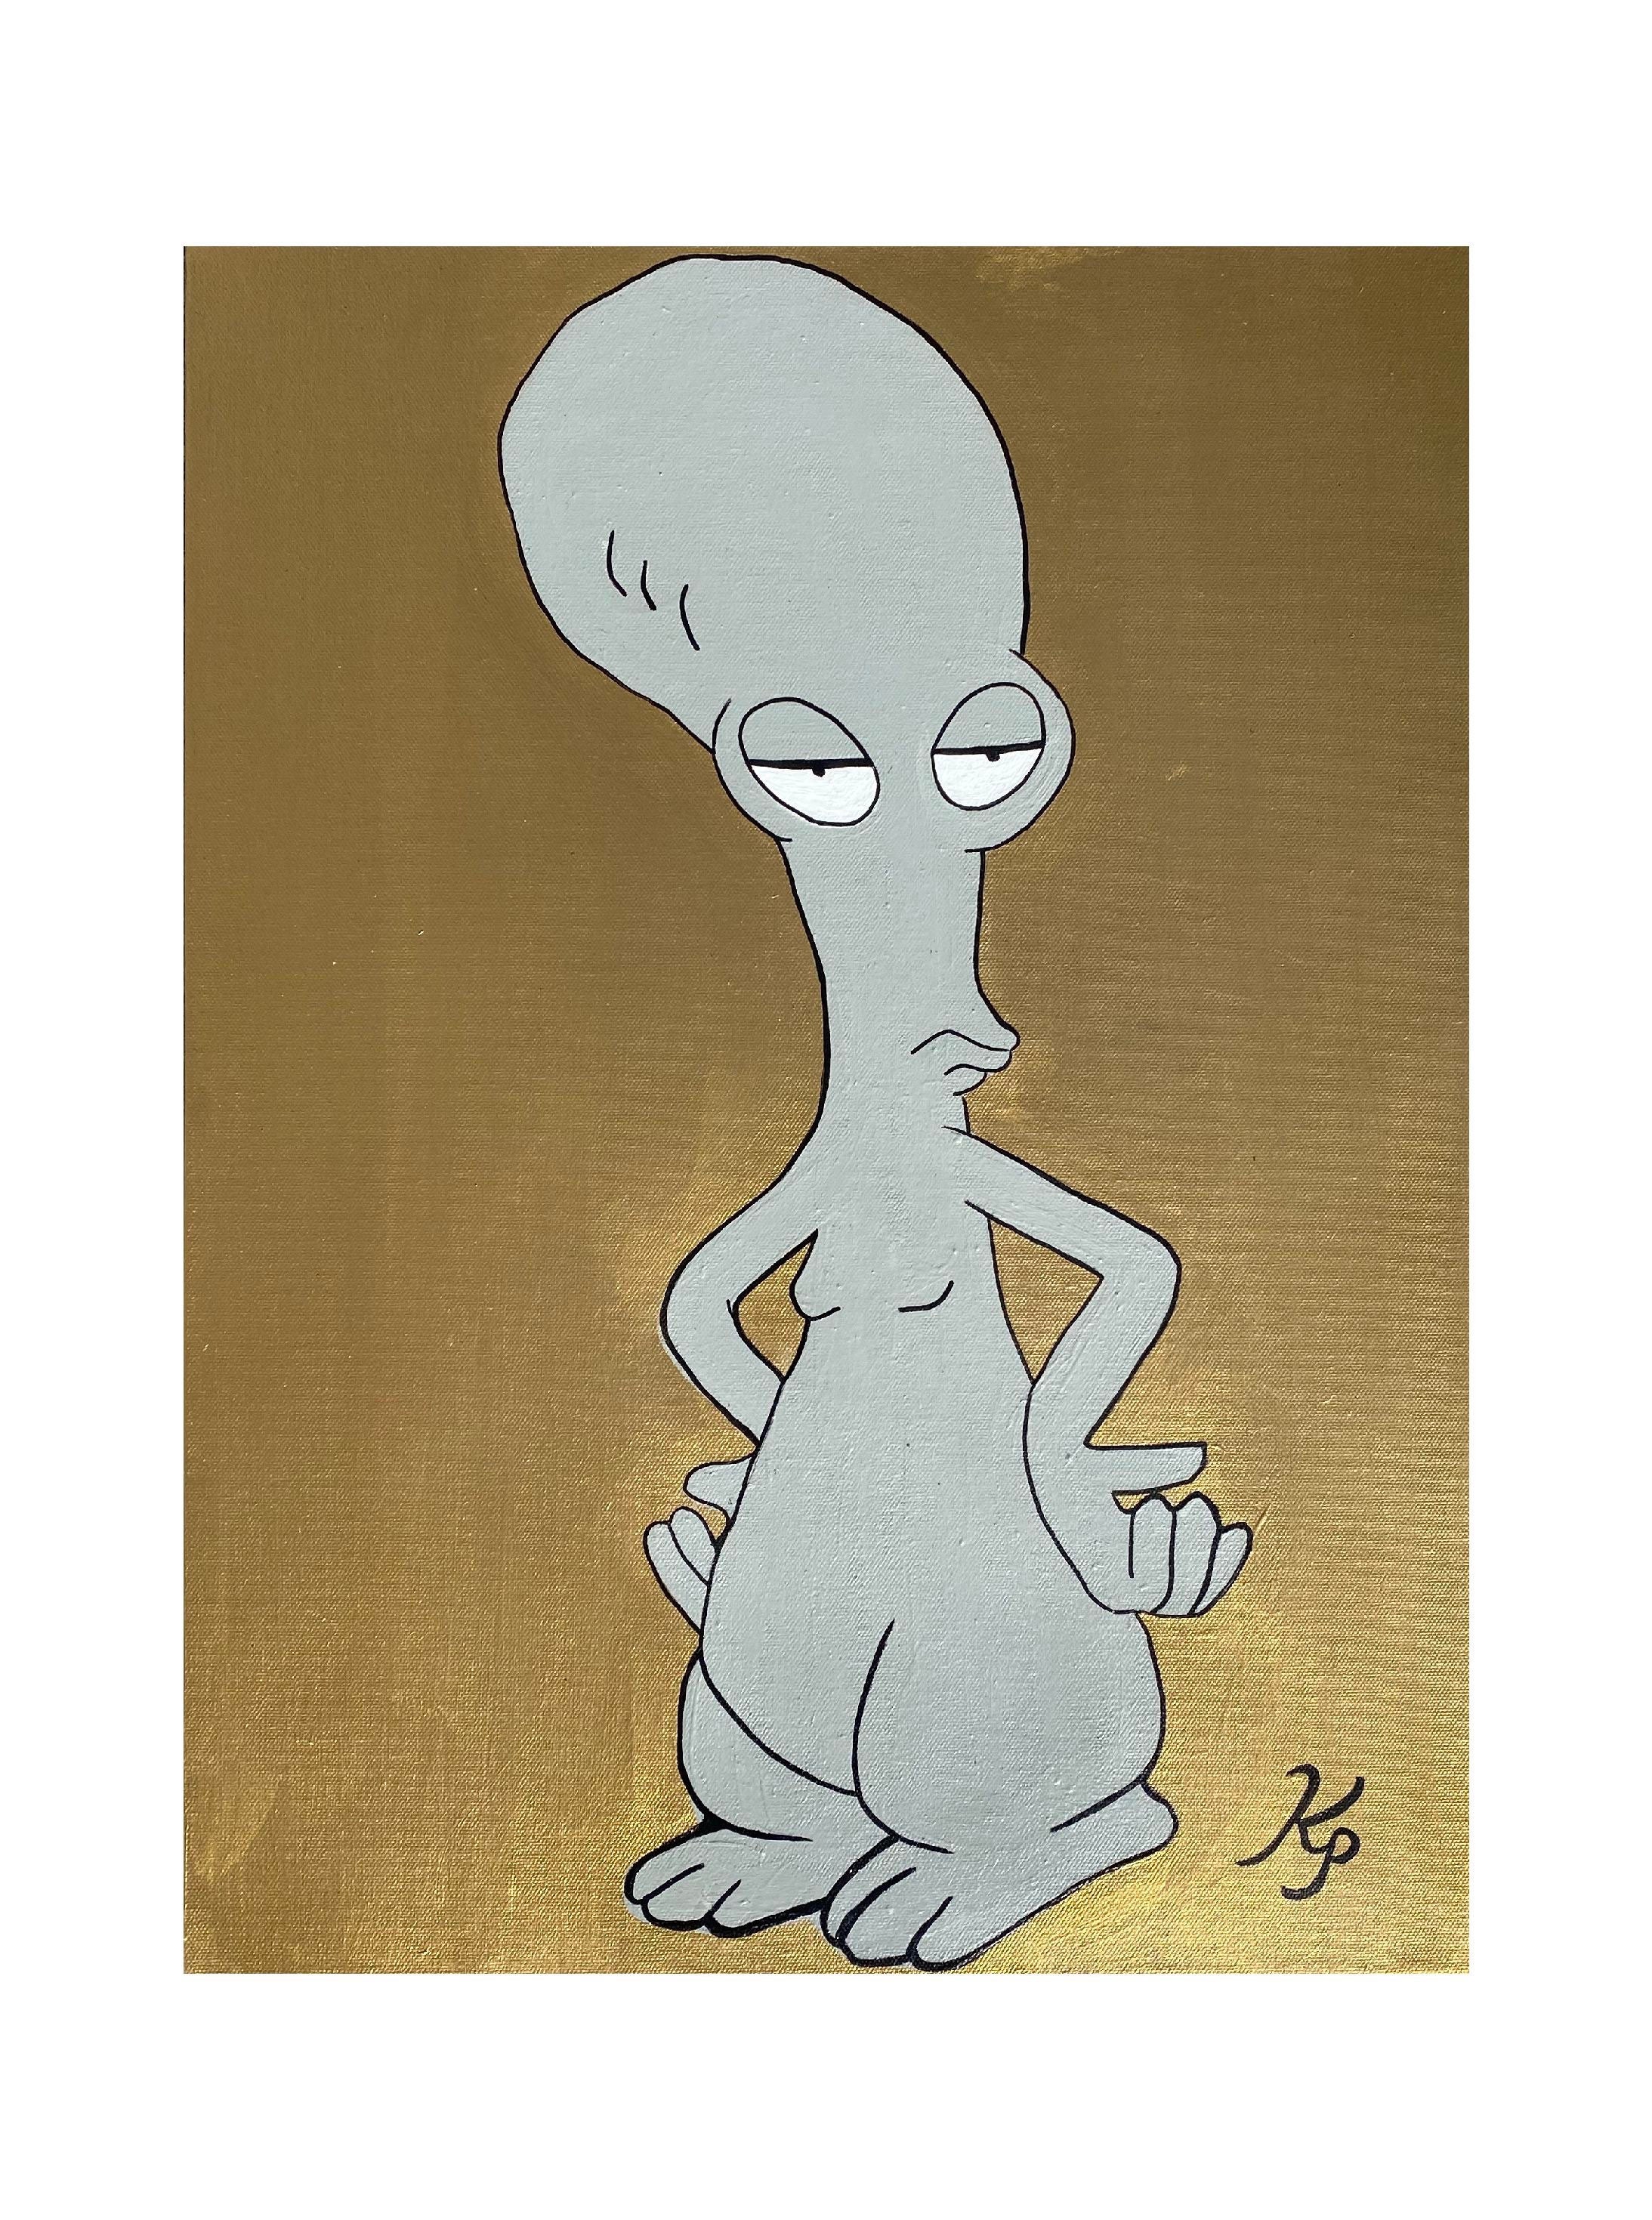 pics of roger from american dad